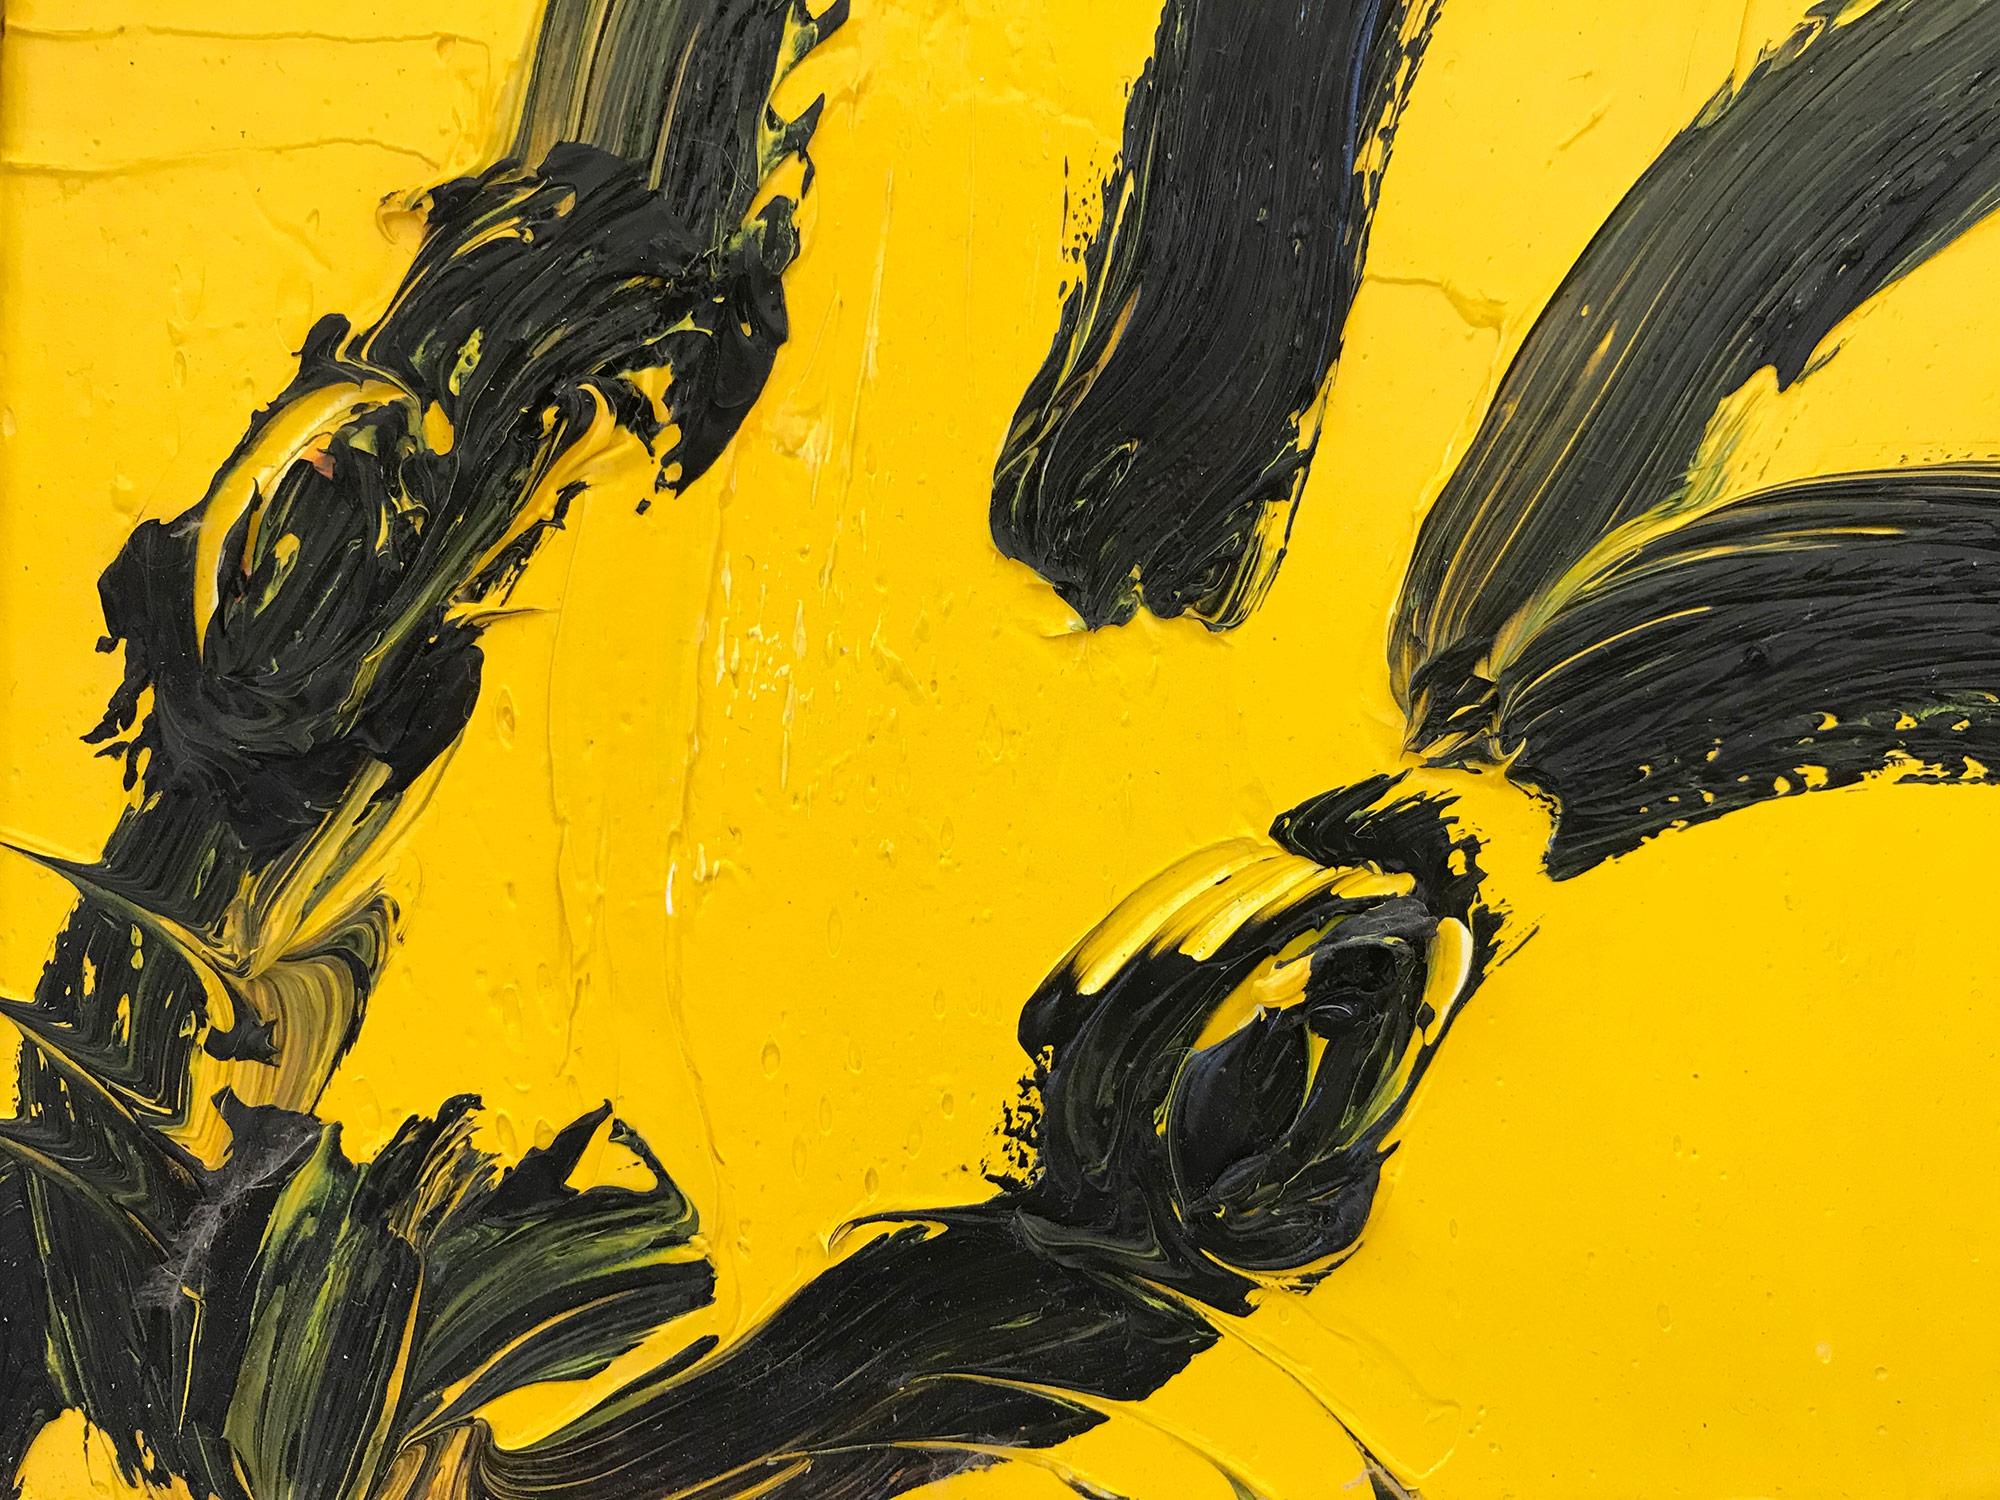 A wonderful composition of one of Slonem's most iconic subjects, Bunnies. This piece depicts a gestural figure of a black bunny on a yellow background with thick use of paint. It is housed in a wonderful antique early 20th Century frame. Inspired by